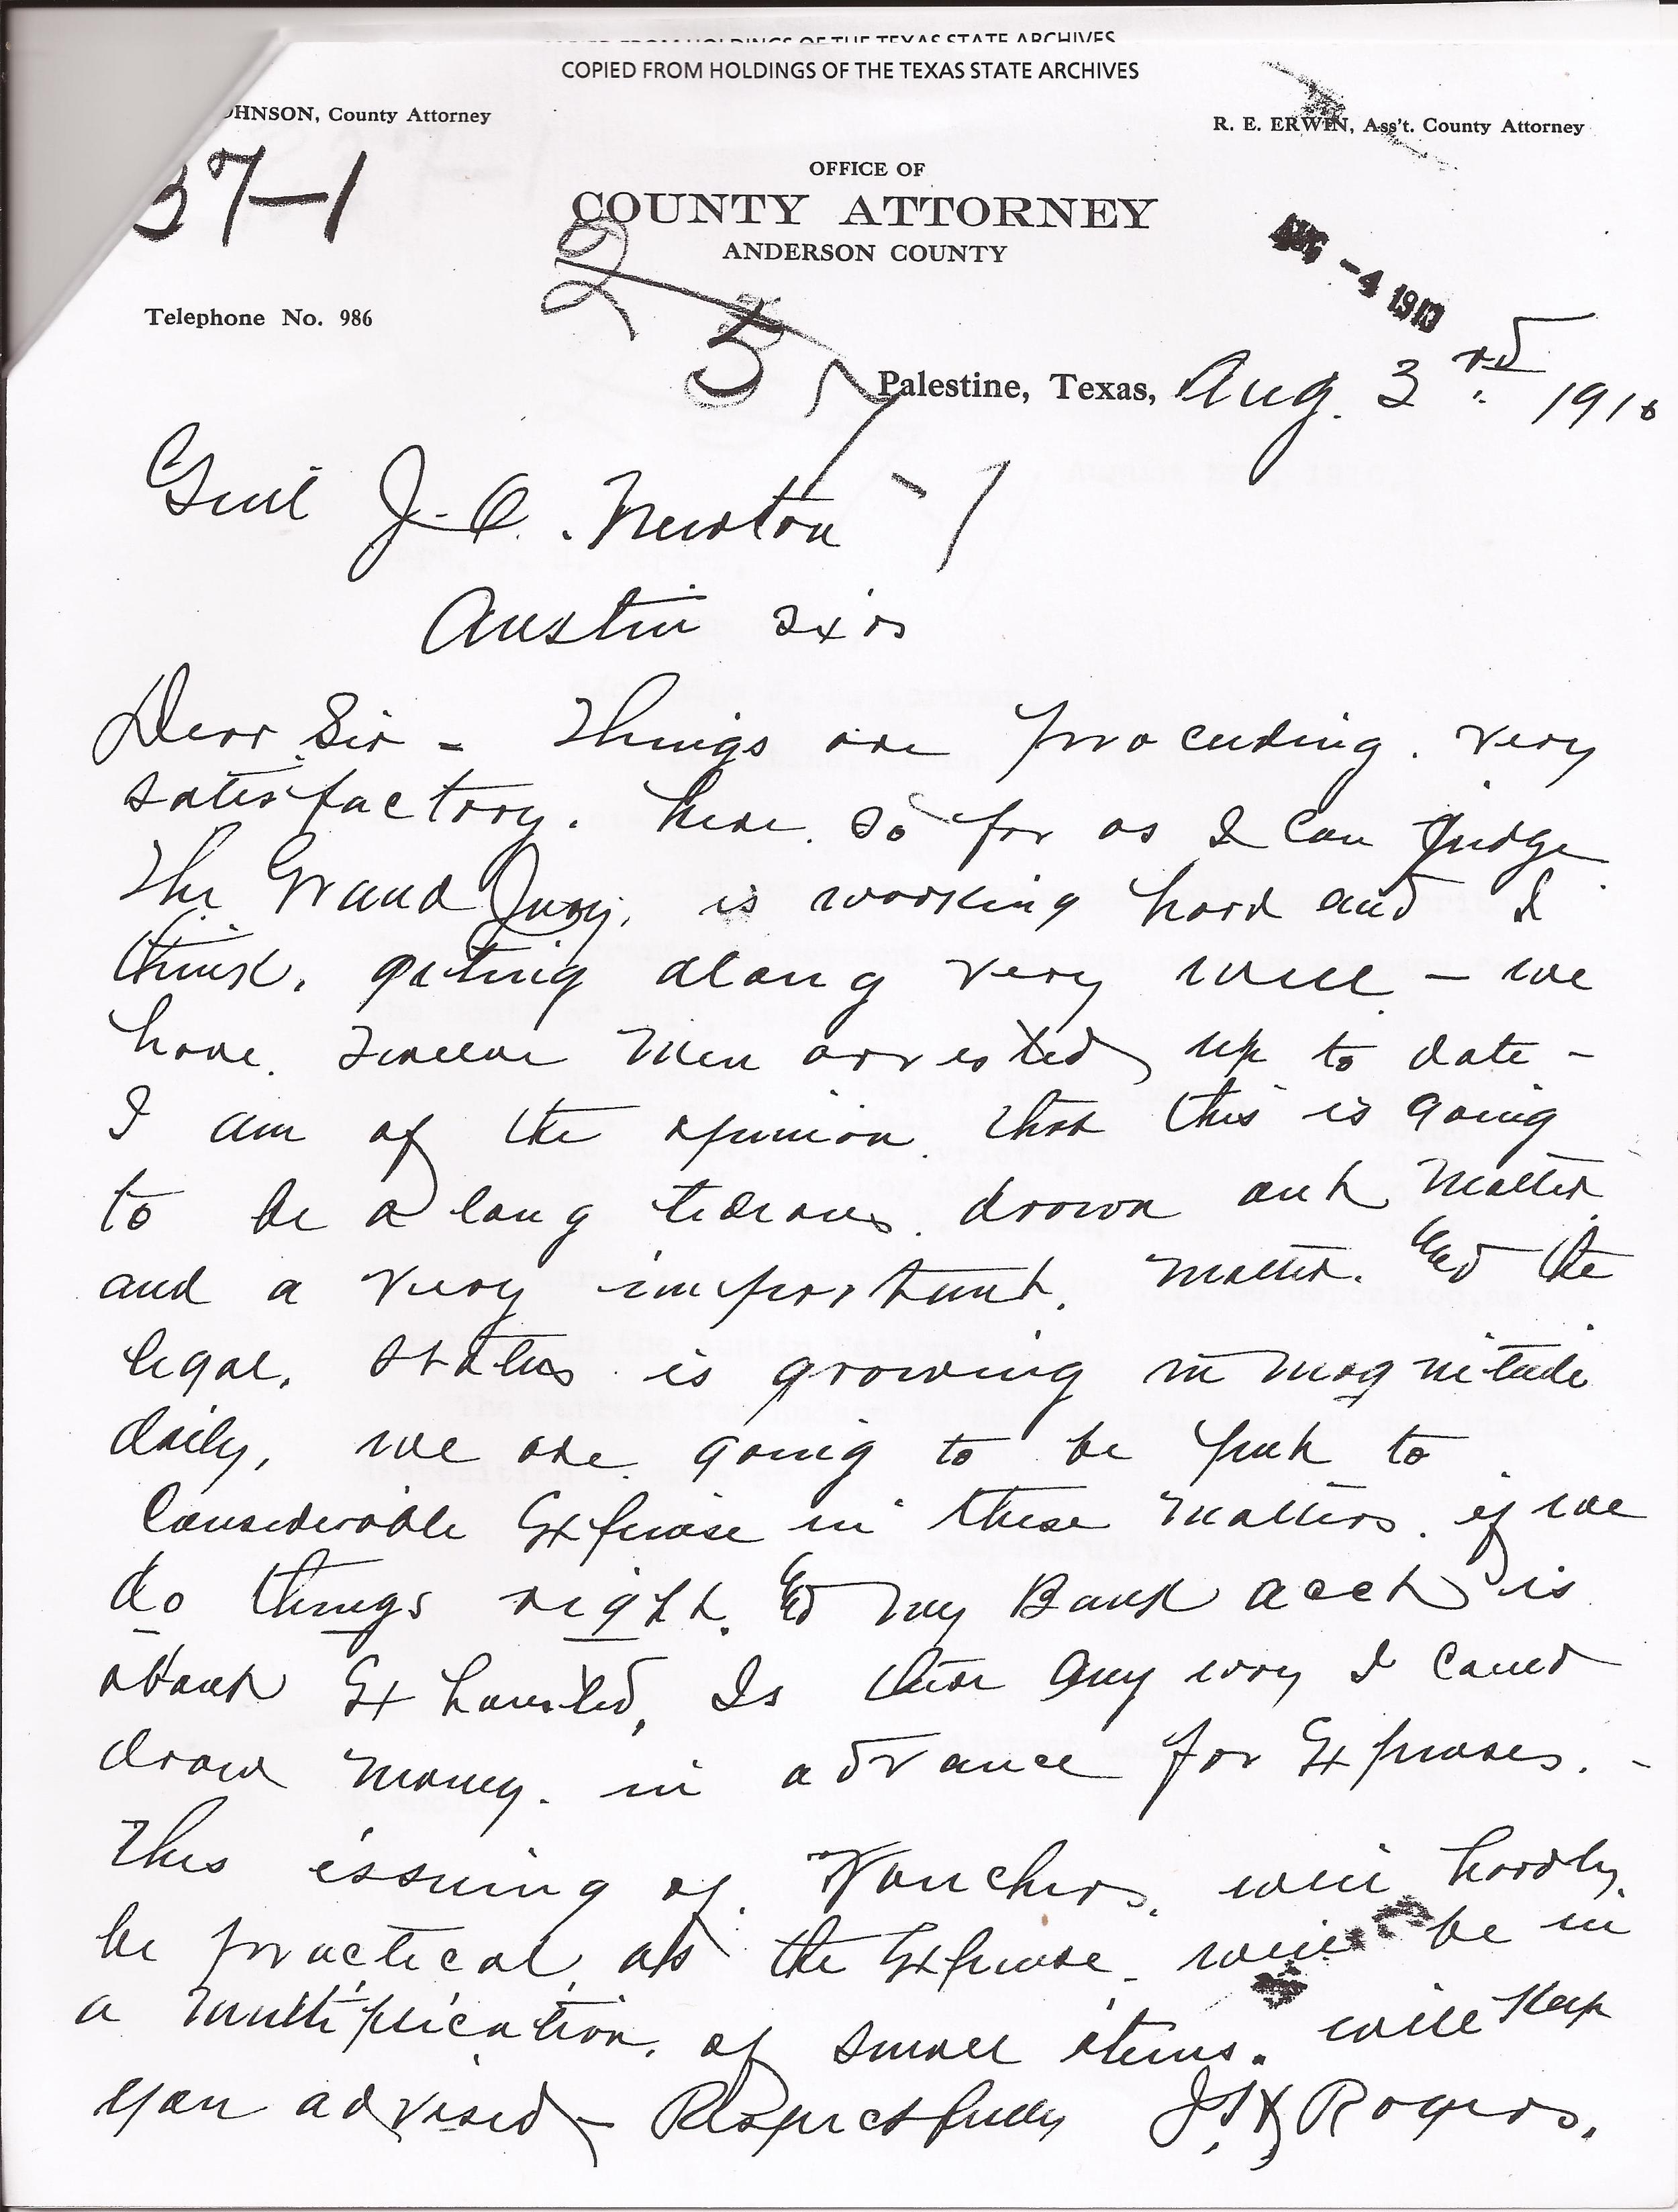  J.H. Rodgers Letter, August 3, 1910 (Company C, Ranger Force, Capt. J.H. Rogers, 1910, Ranger Force Military Rolls, Texas Adjutant General's Department. &nbsp;Archives and Information Services Division, Texas State Library and Archives Commission) 